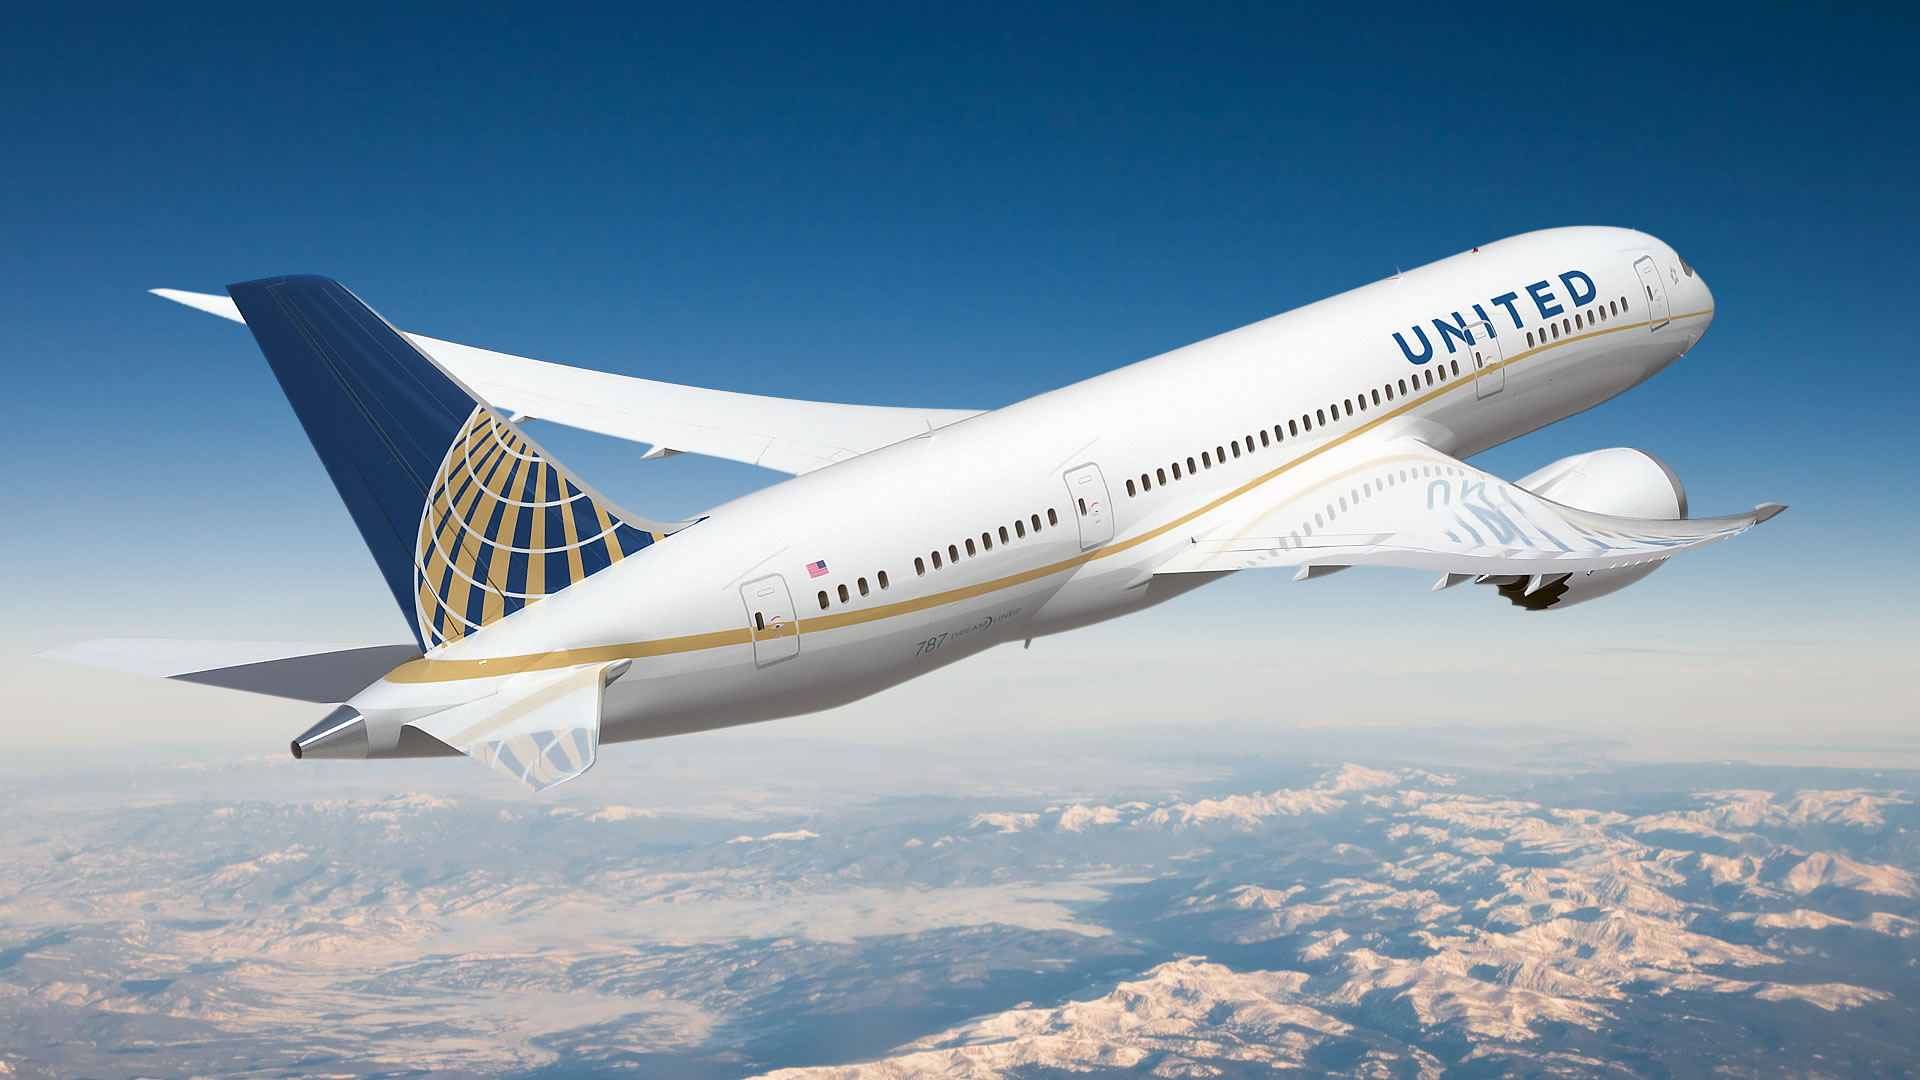 Airline company United Airlines placed order with Boeing for 100 airplanes Dreamliner